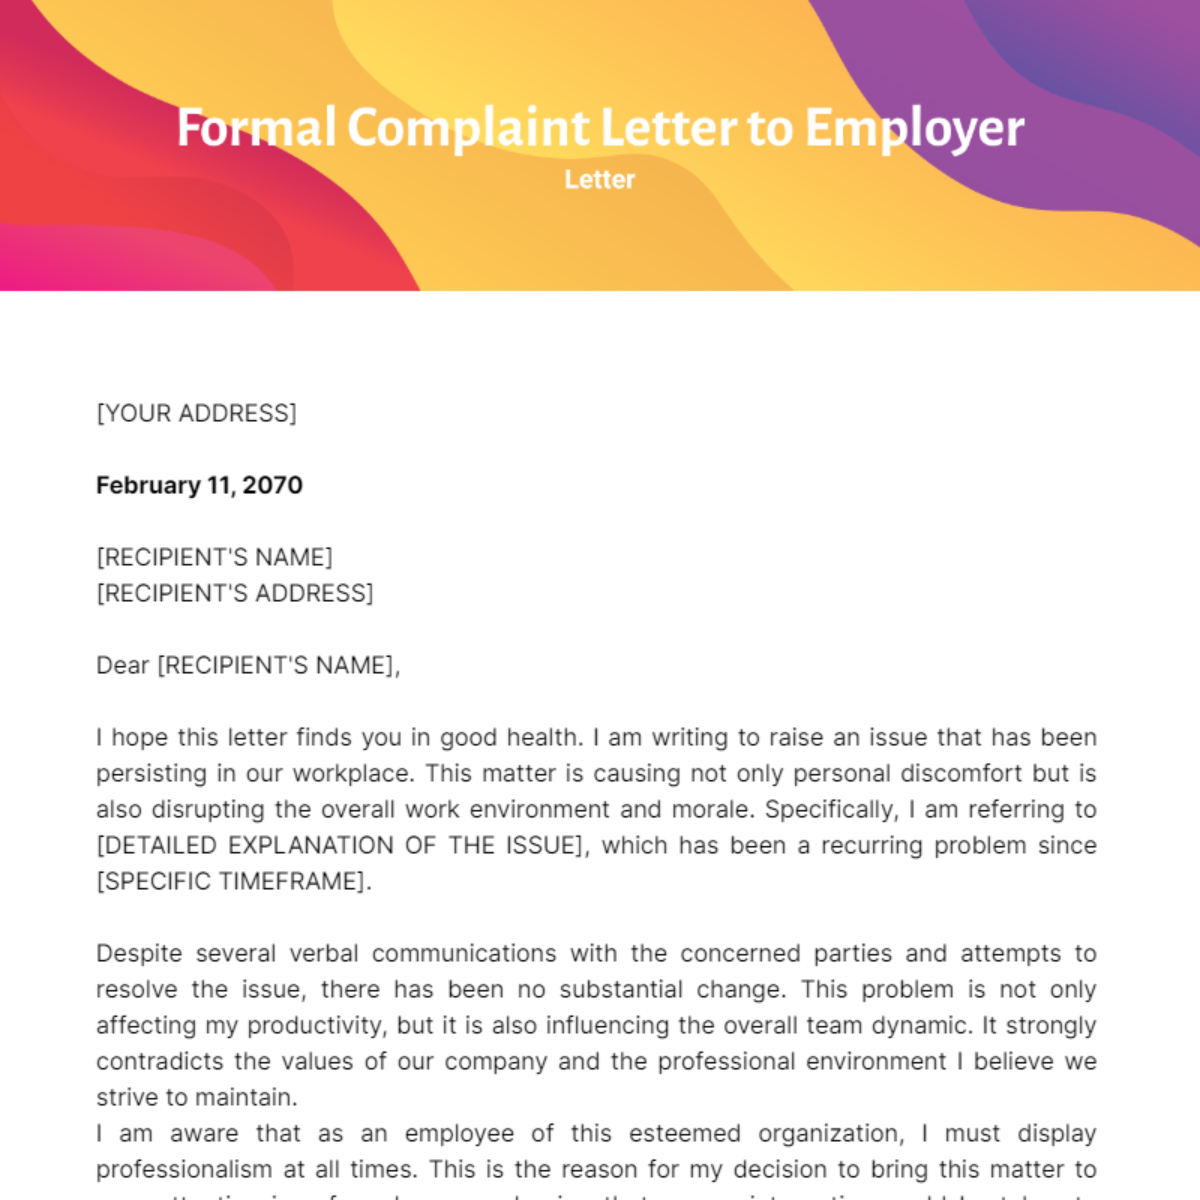 Formal Complaint Letter to Employer Template